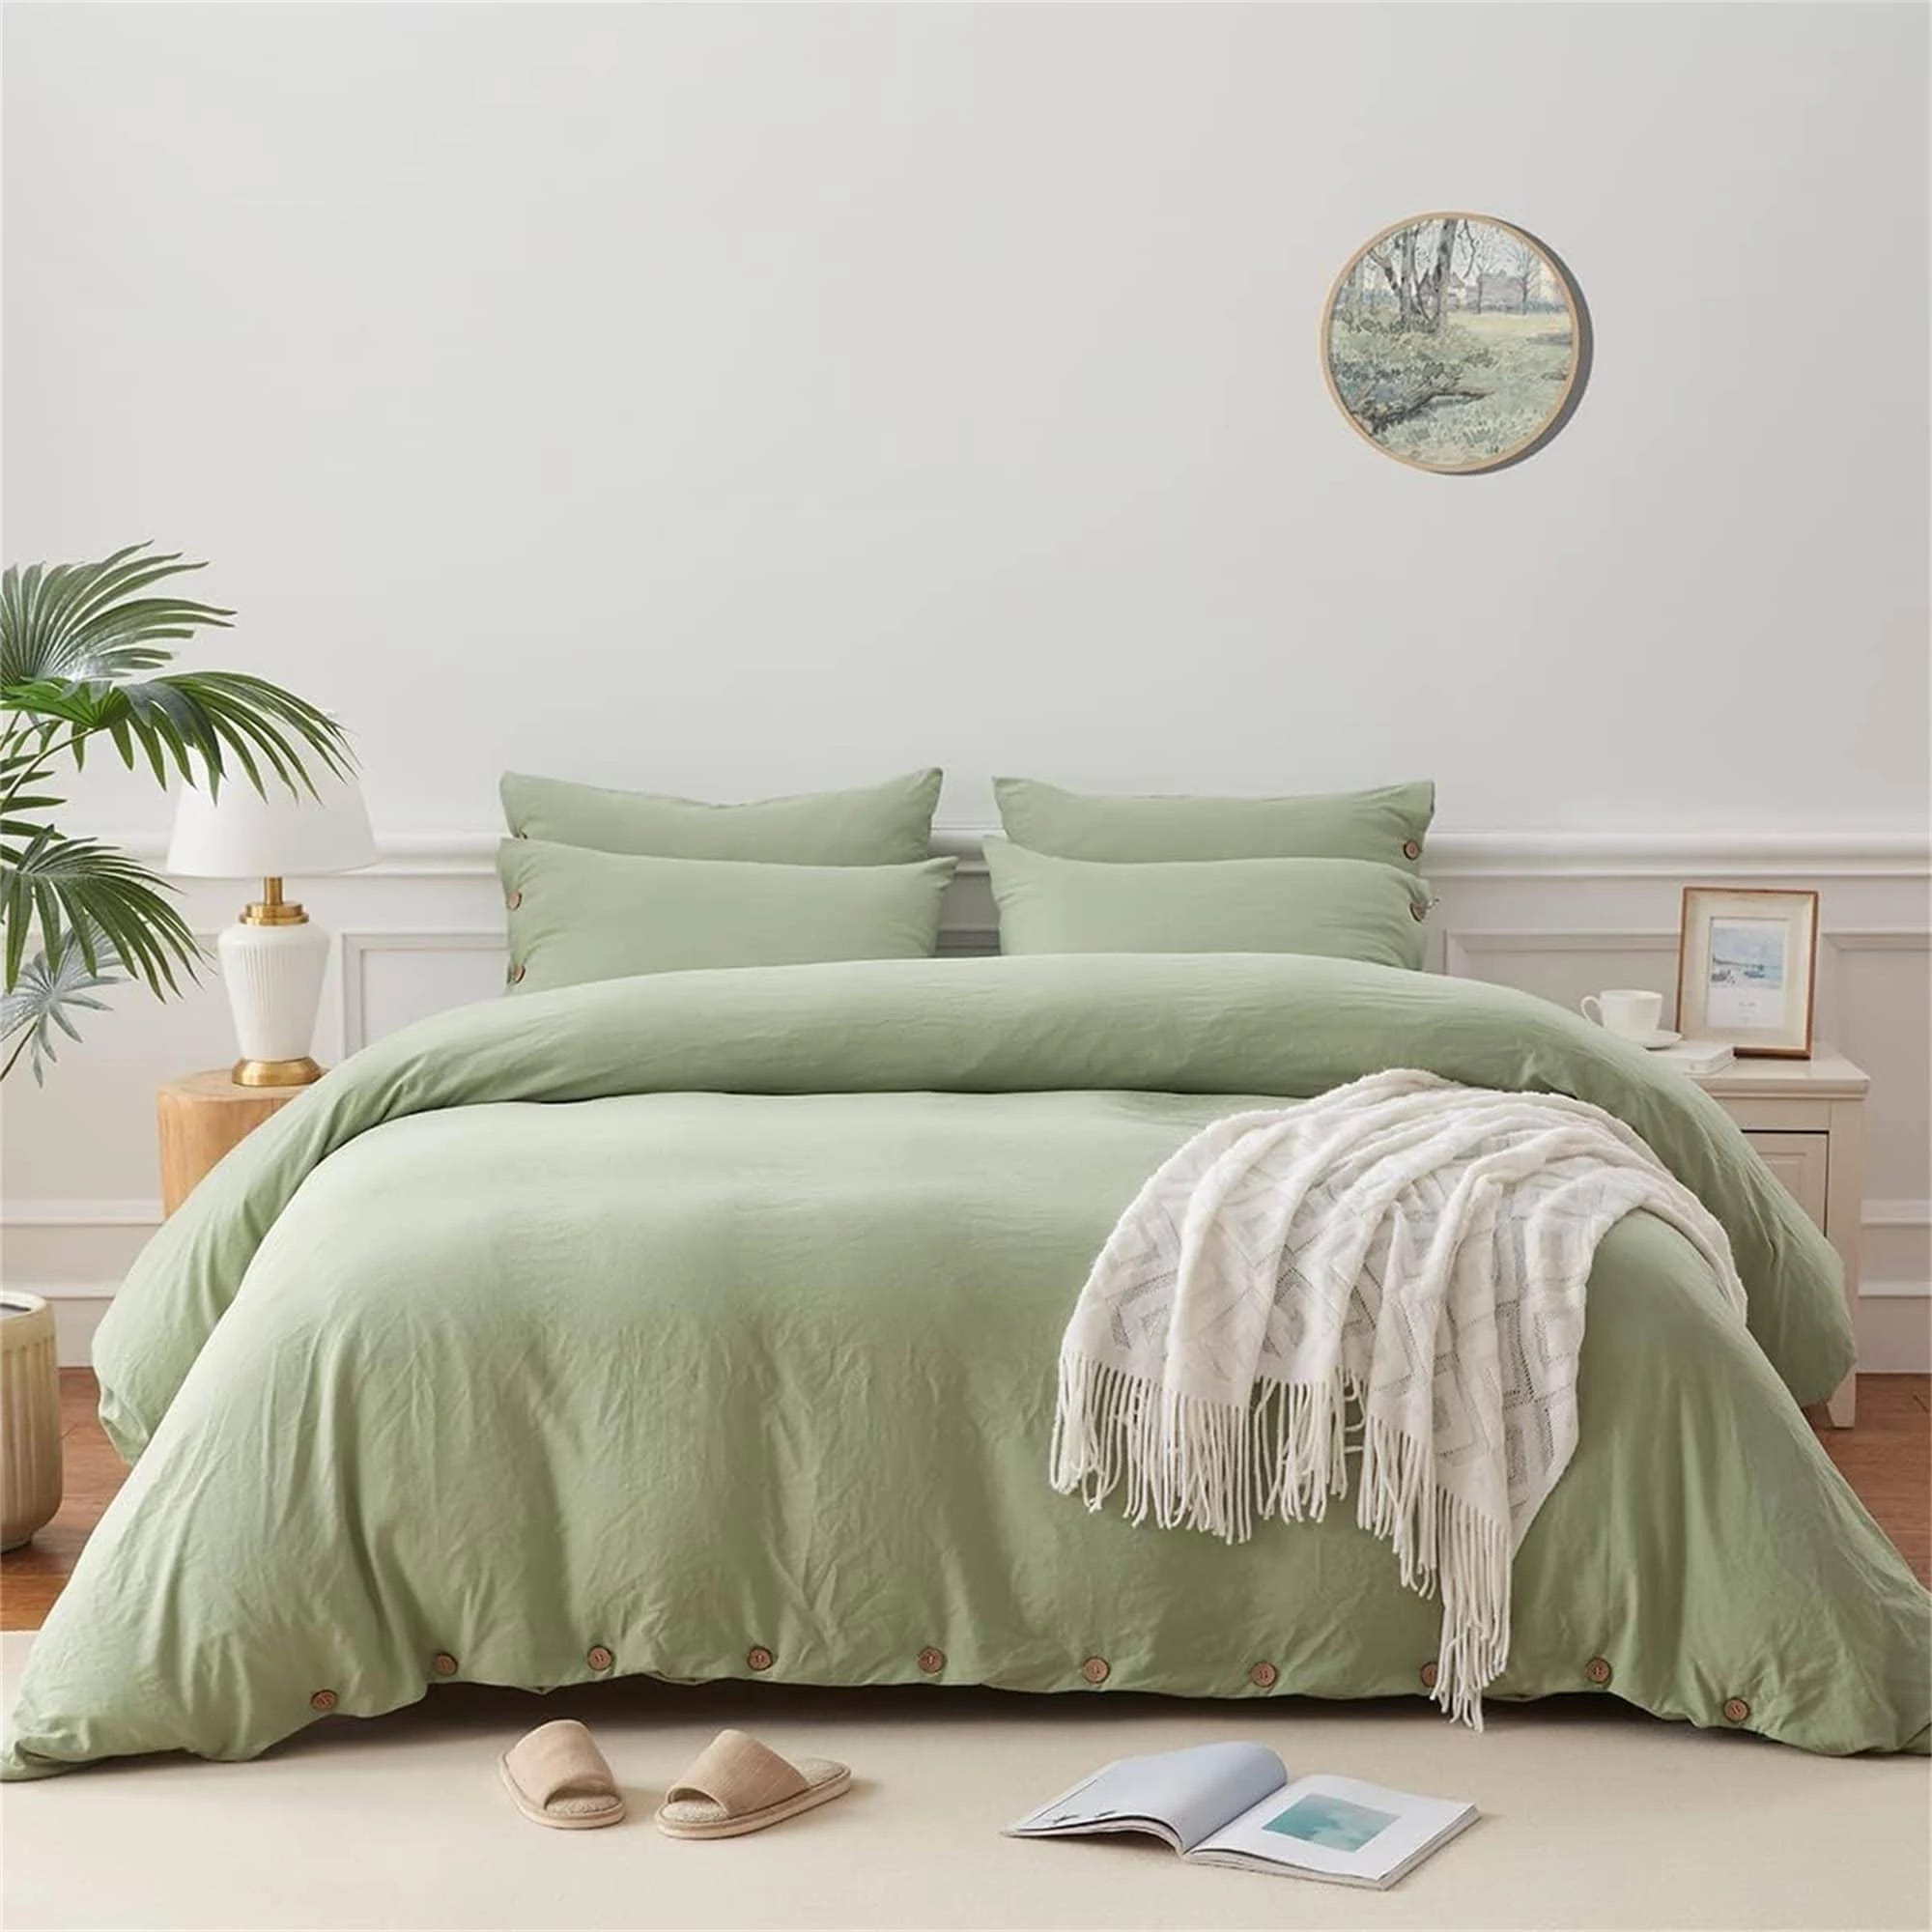 Elegant Sage Green Luxury Duvet Cover for Queen Size Beds | Image